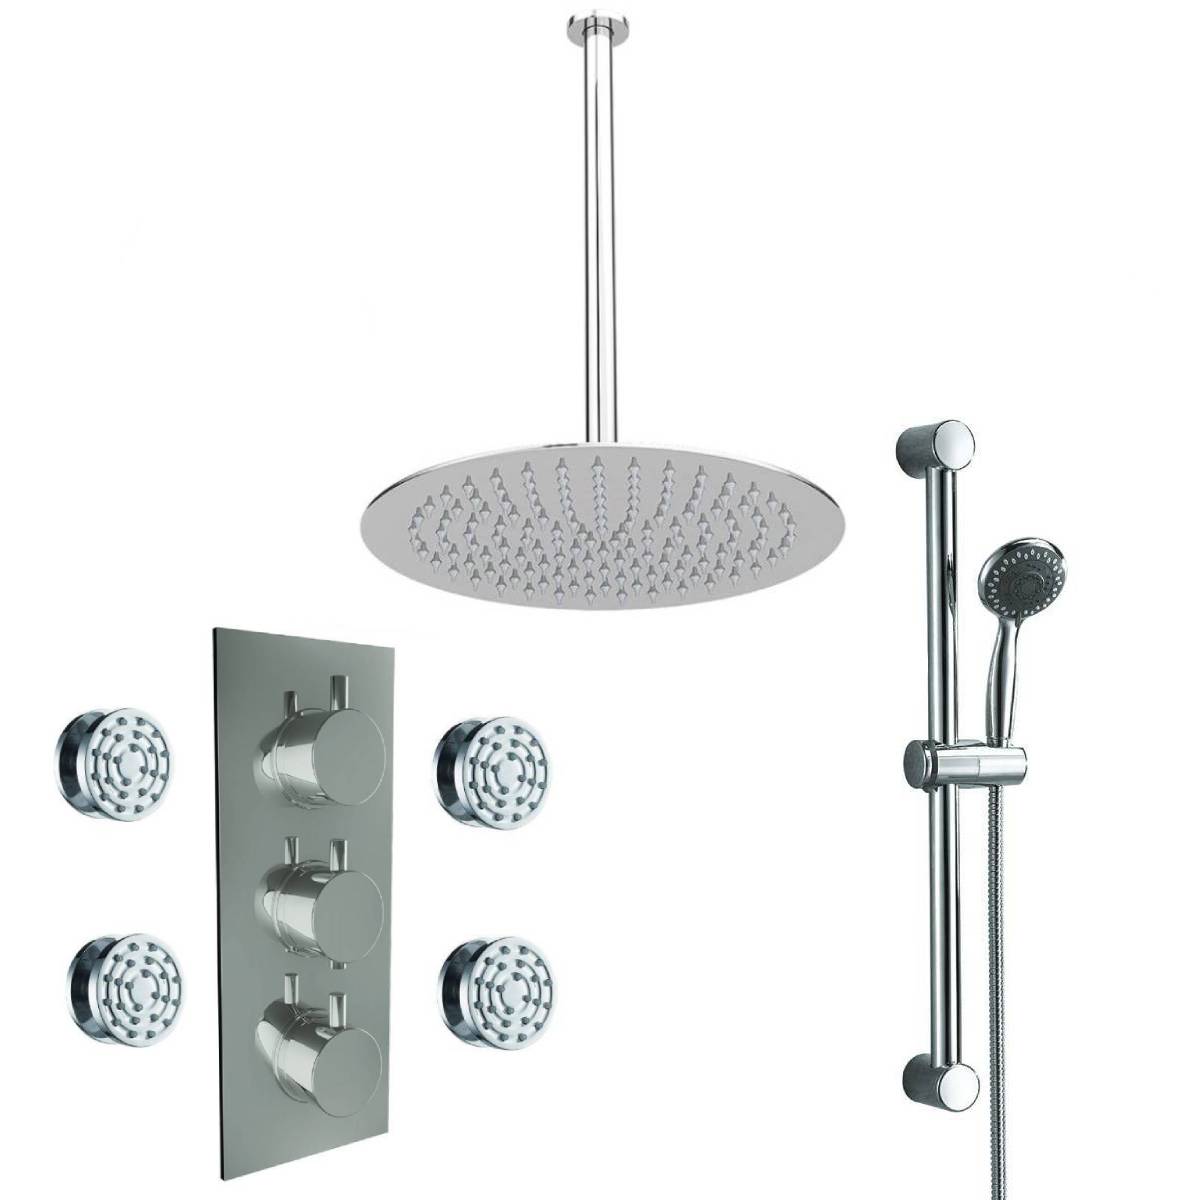 Round Triple Thermostatic Concealed Mixer Shower Kit with Ceiling Mounted 300mm Shower Head, Slide Rail Kit & Body Jets (12492)